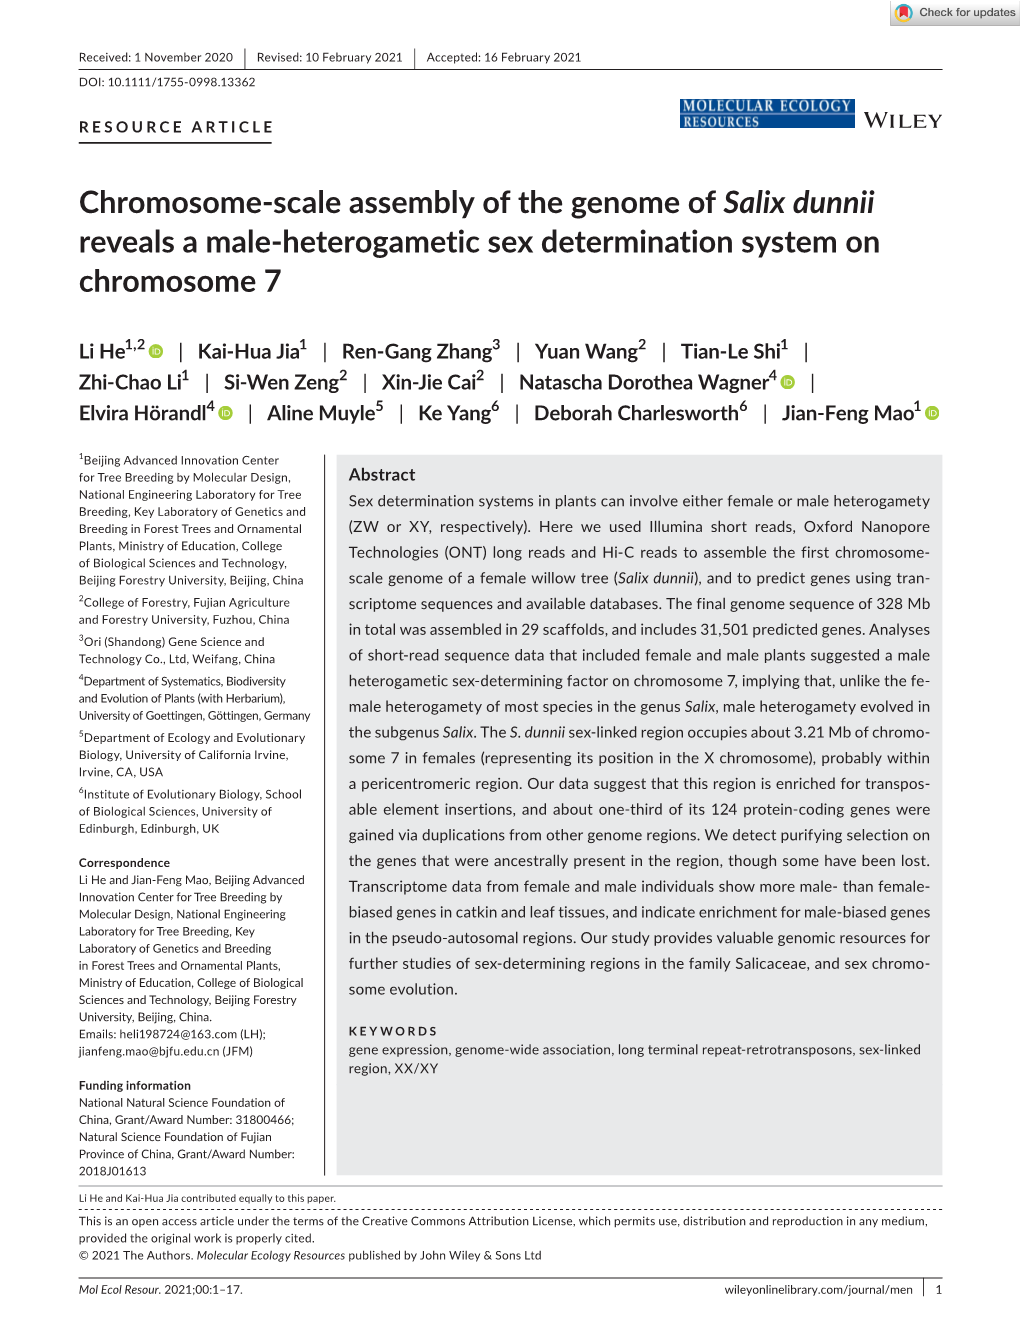 Scale Assembly of the Genome of Salix Dunnii Reveals a Male-­Heterogametic Sex Determination System on Chromosome 7